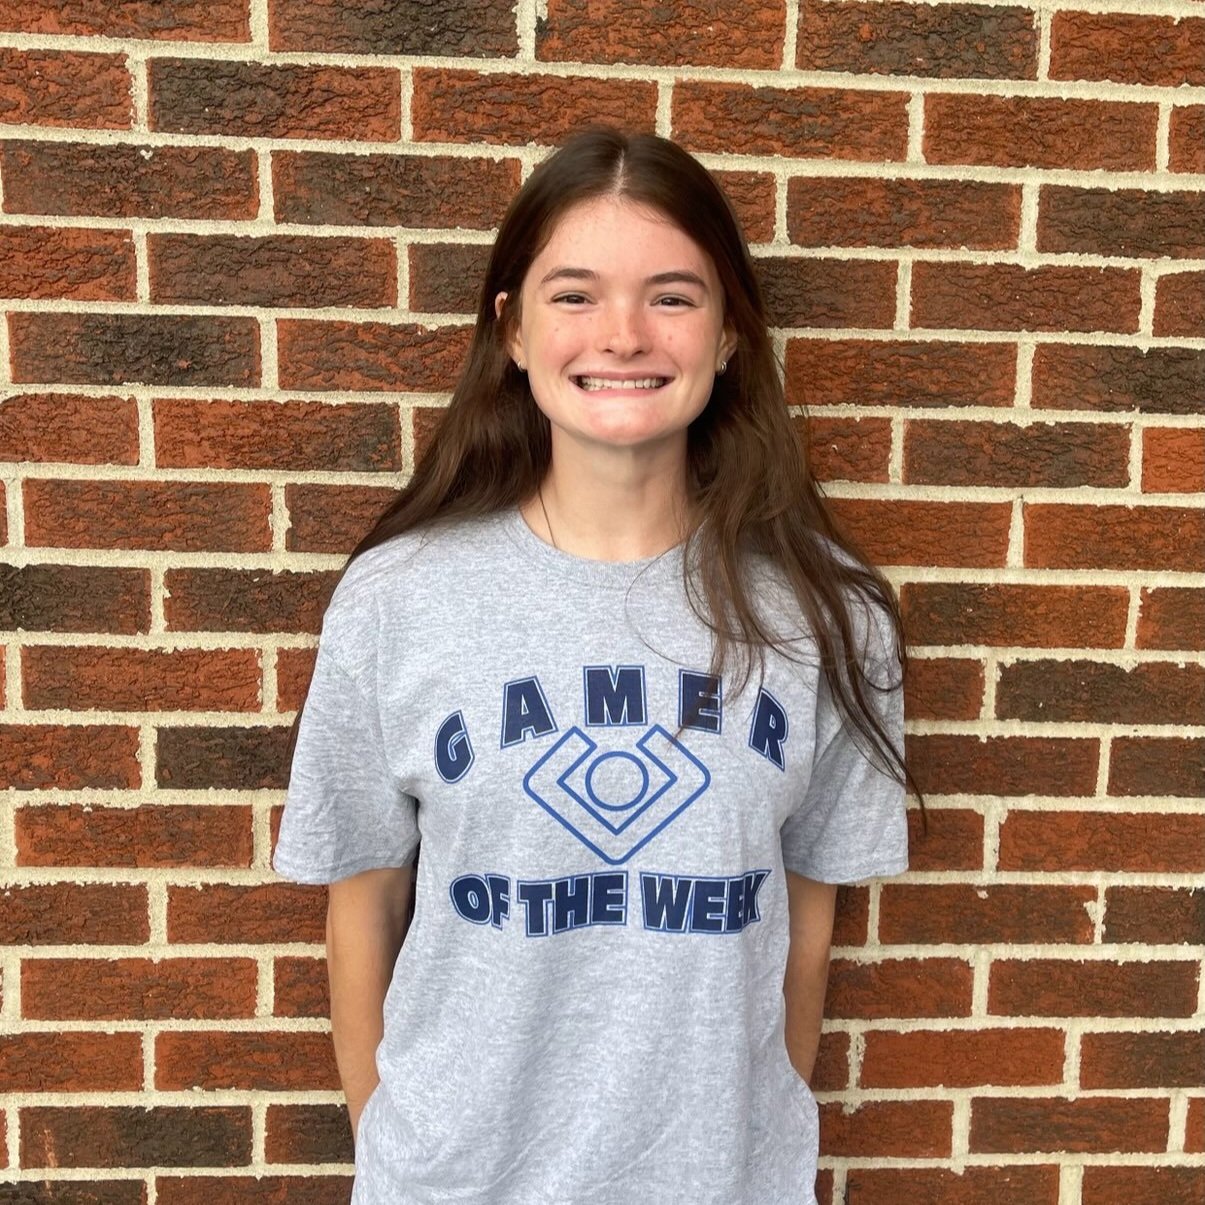 Pendleberry Receive Gamer of the Week Honors | Teays Physical Therapy ...